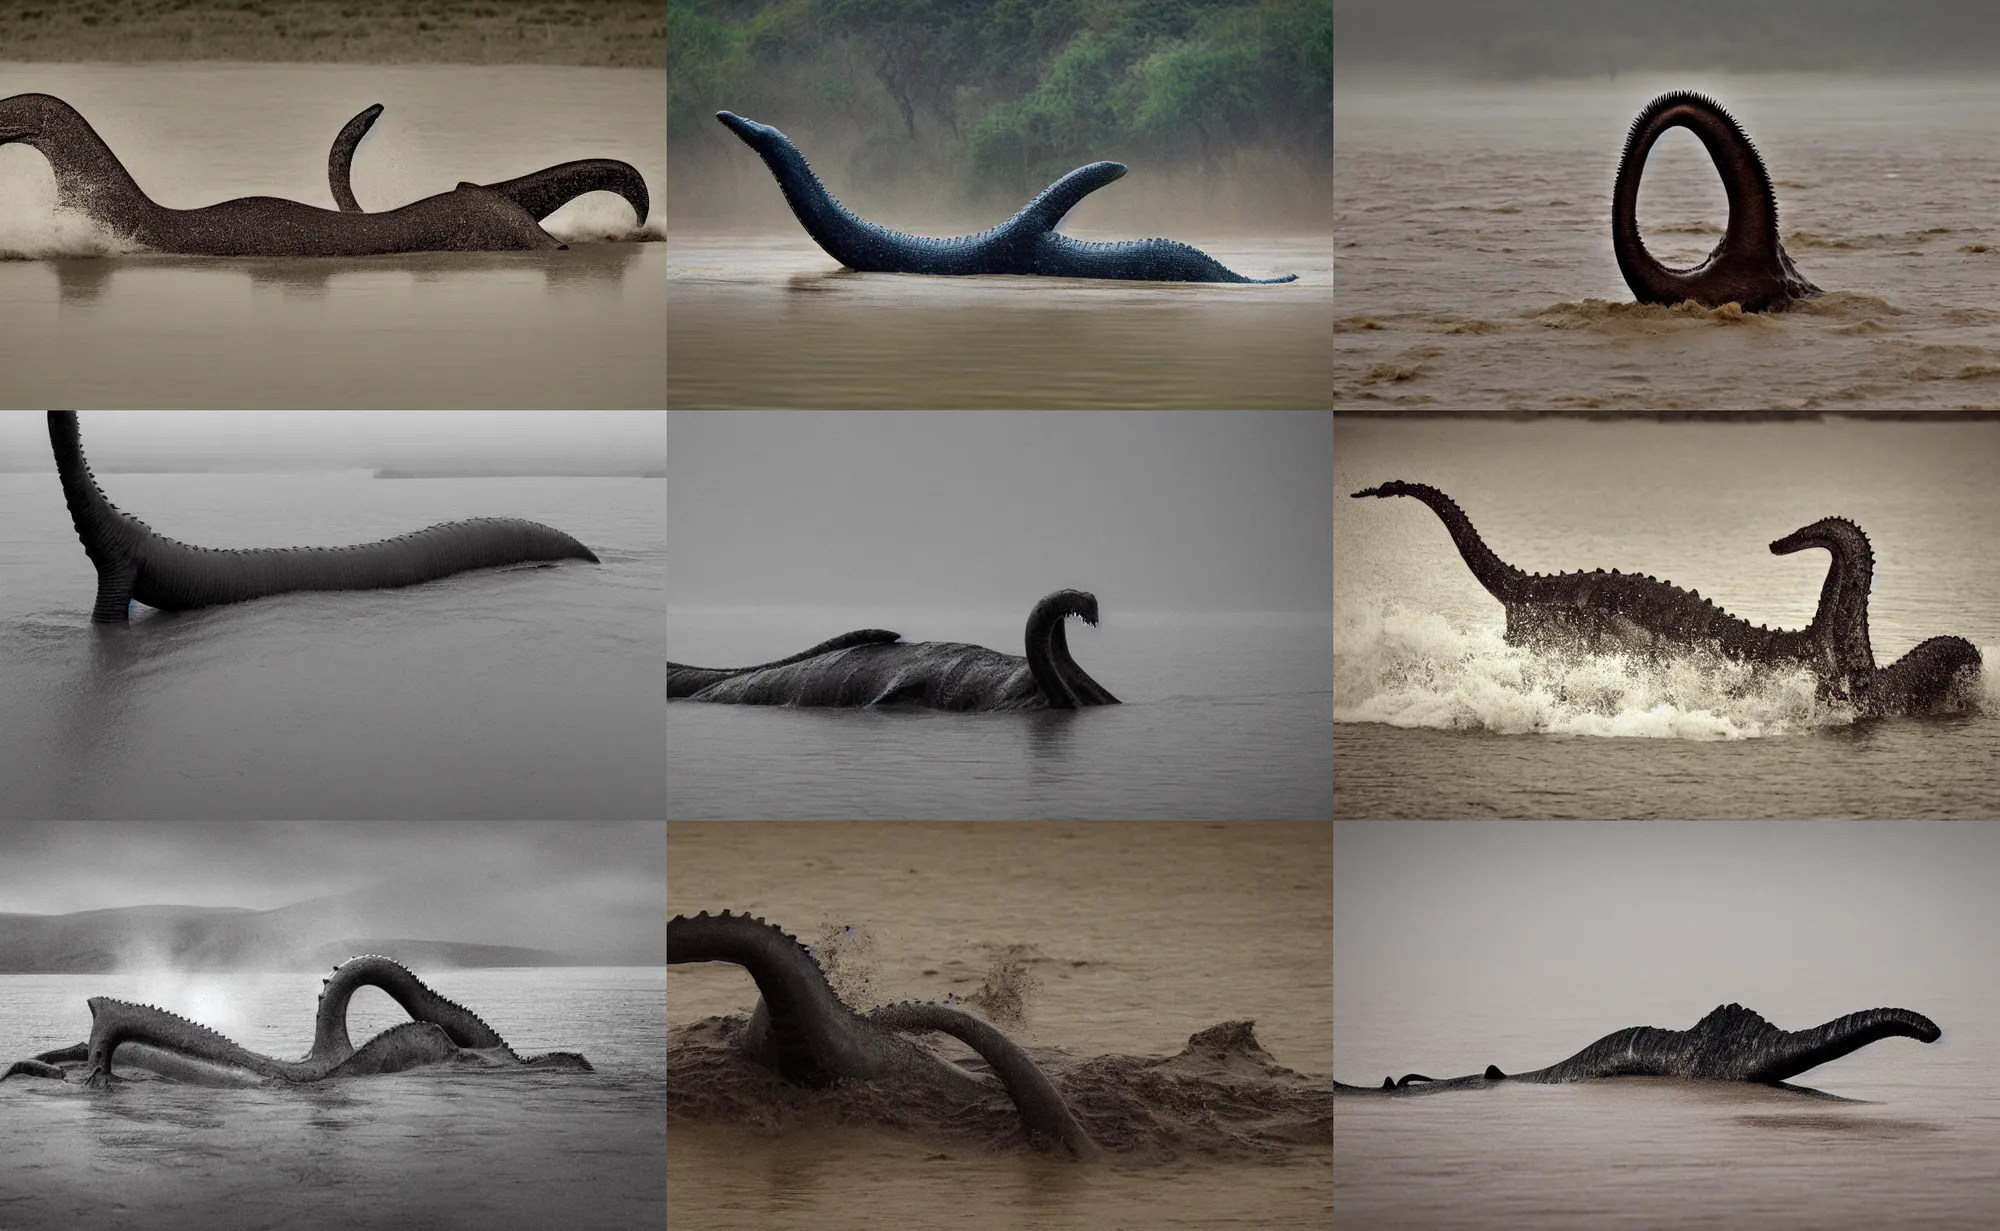 Prompt: nature photography of the loch ness monster, a plesiosaur, in flood waters, african savannah, rainfall, muddy embankment, fog, digital photograph, award winning, 5 0 mm, telephoto lens, national geographic, large eyes